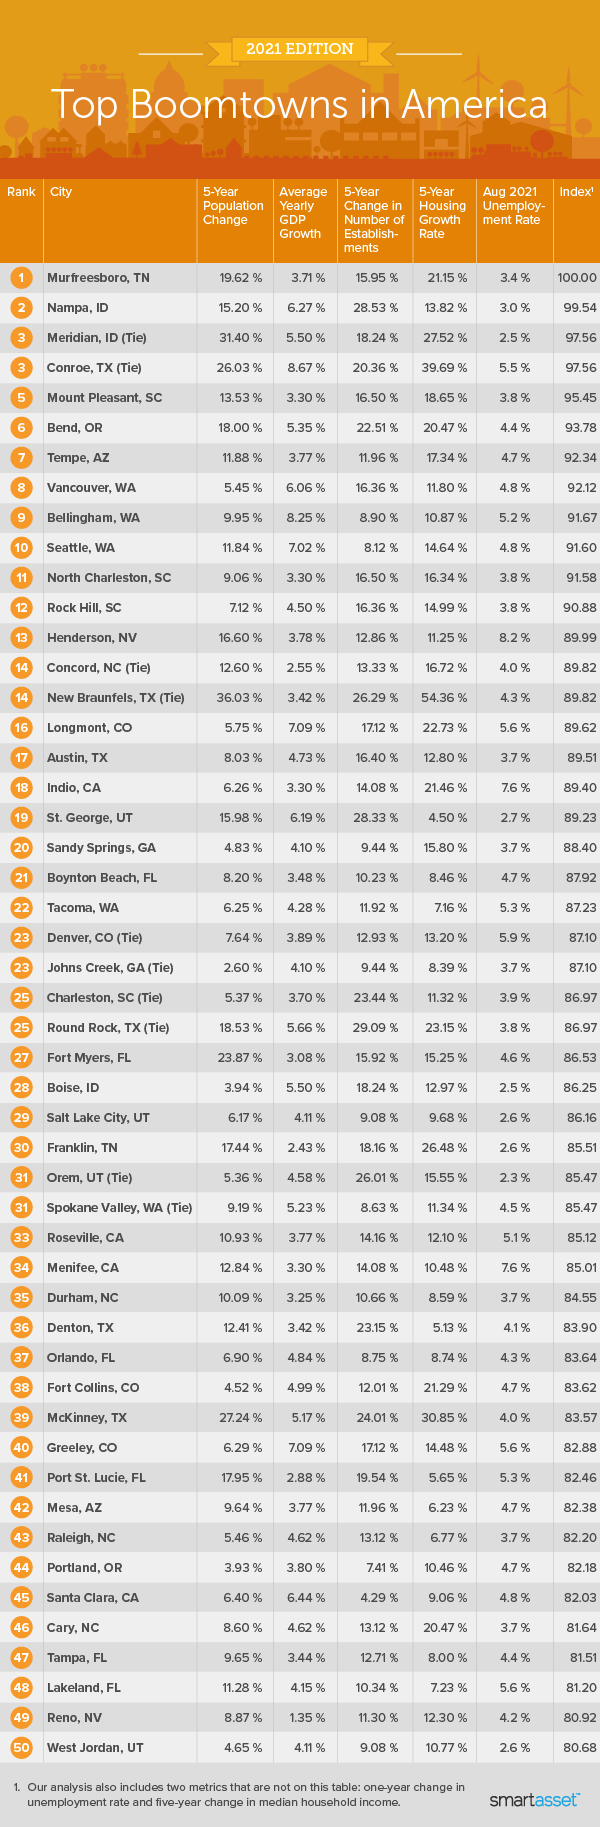 Image is a table by SmartAsset titled "Top Boomtowns in America."